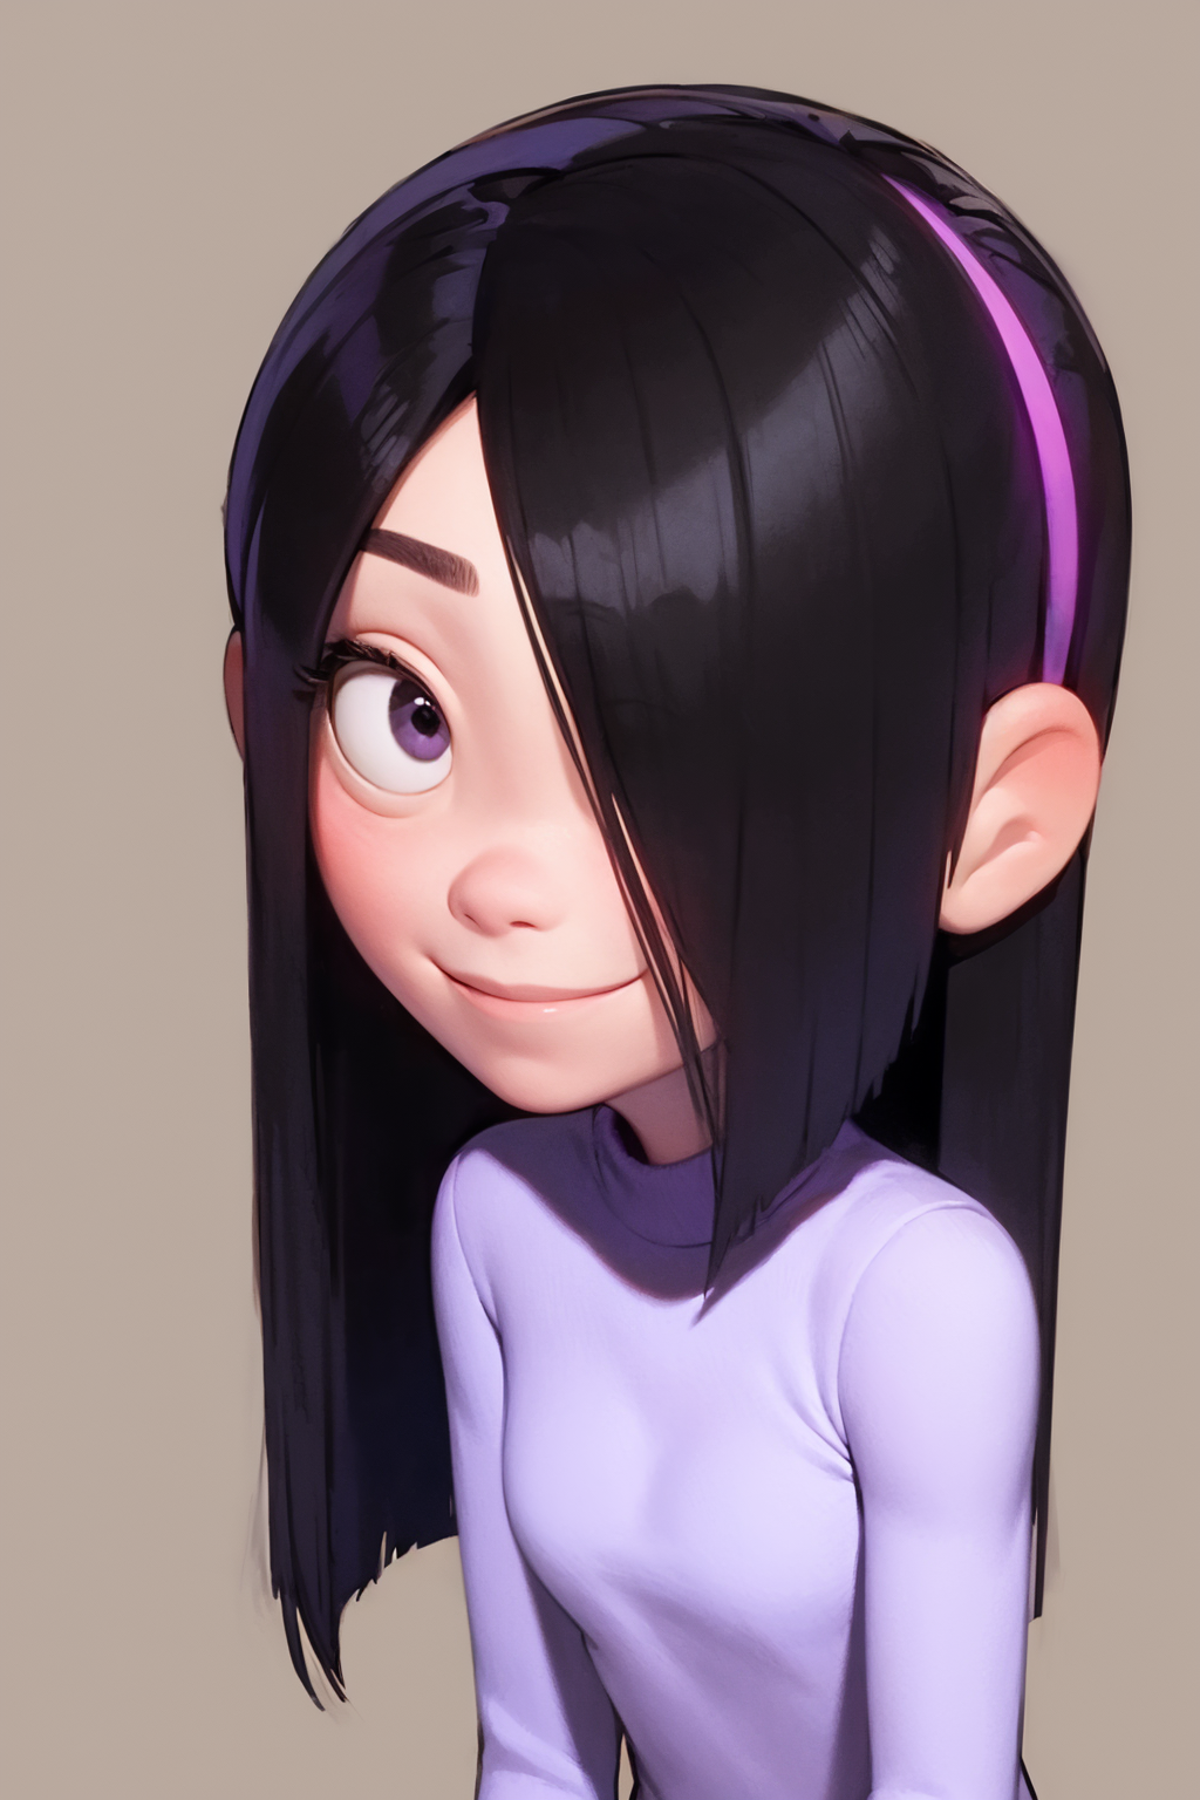 A smiling anime girl with long black hair and purple bangs.